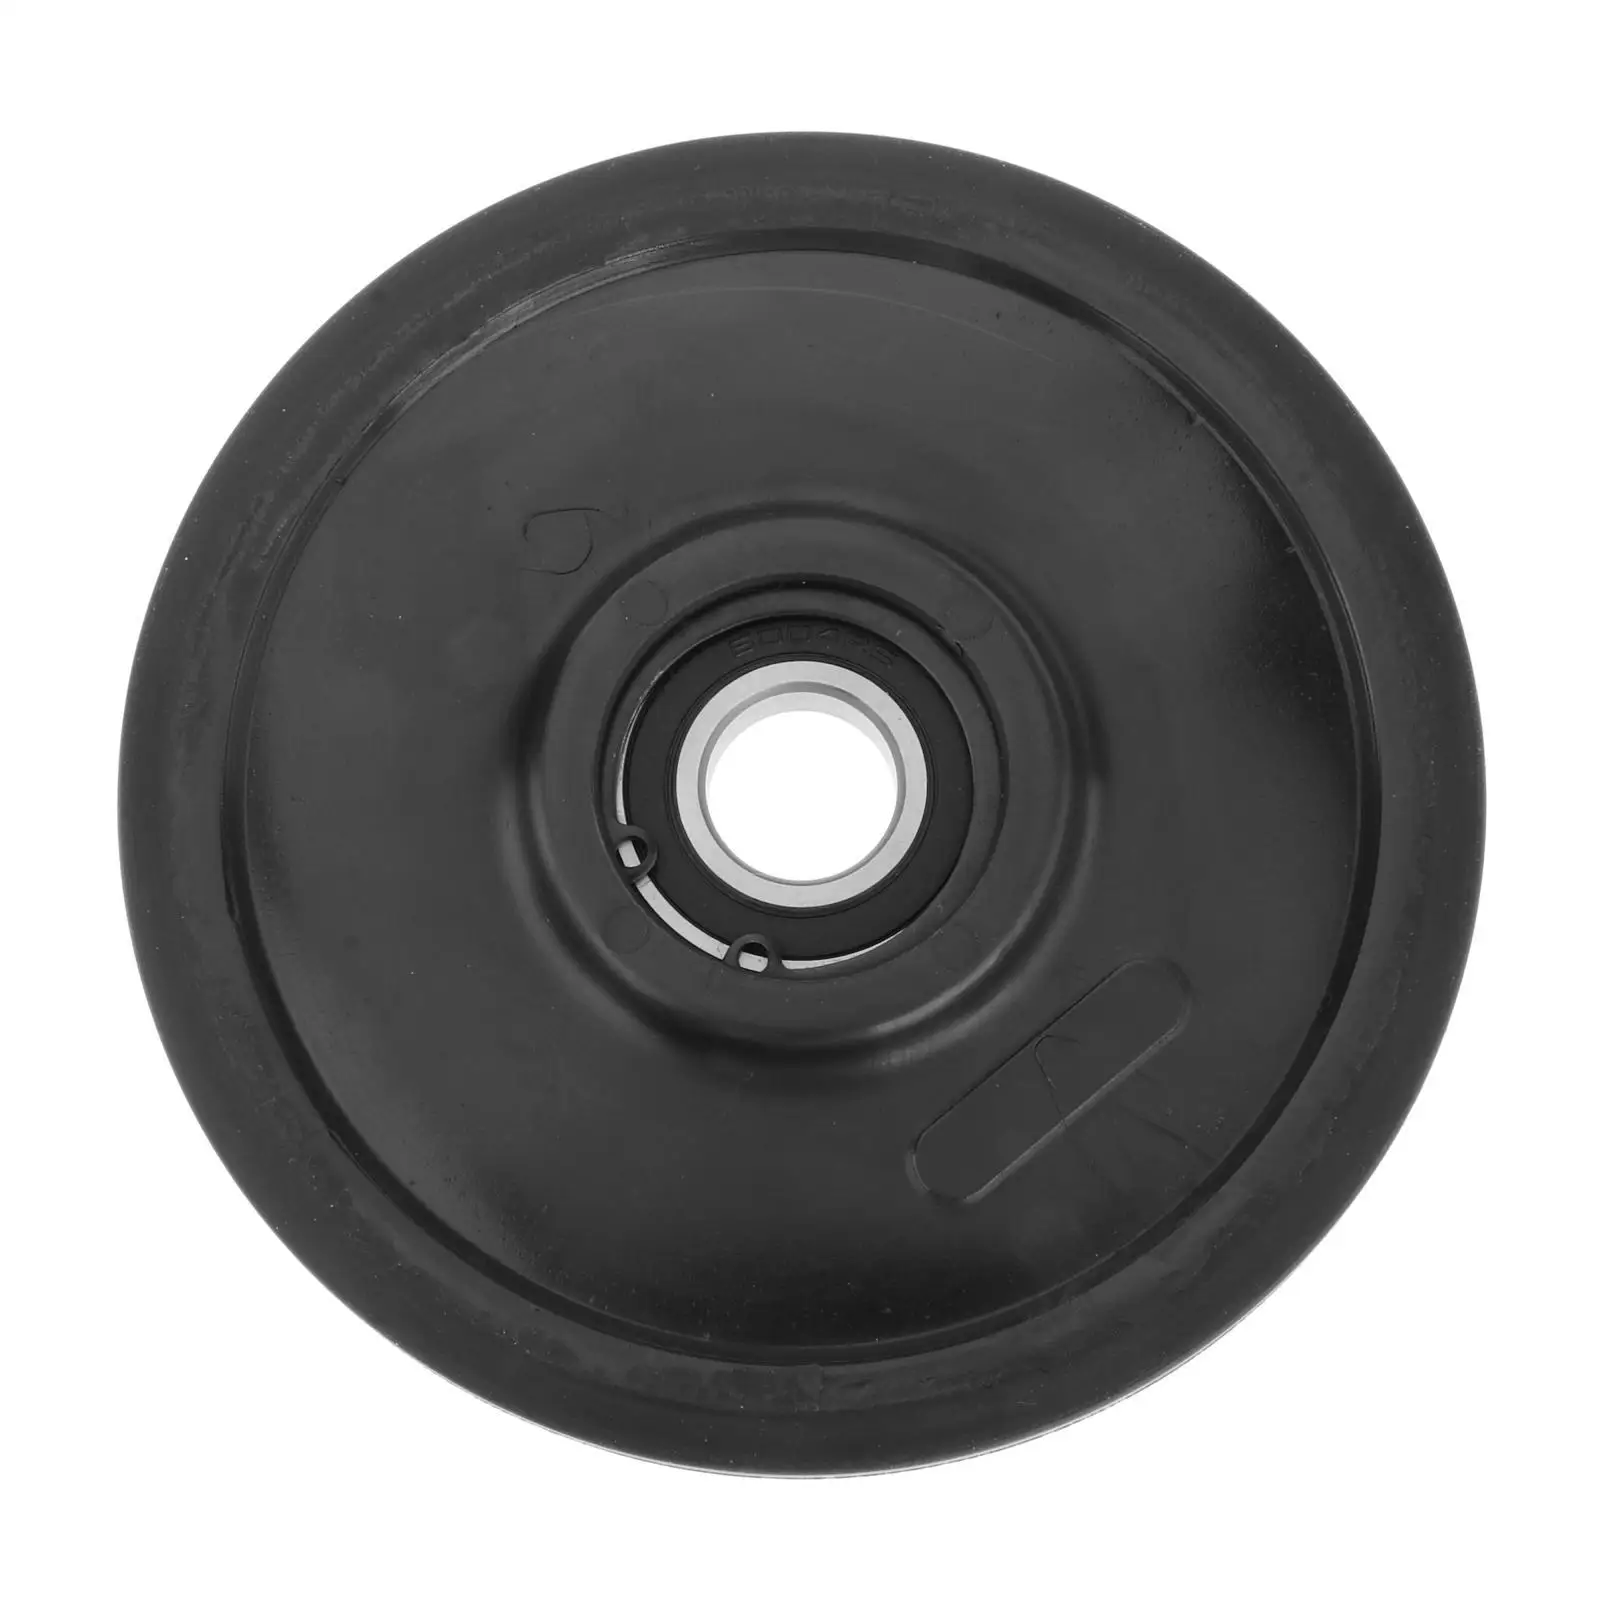 Snowmobile Idler Wheel with Bearing for Snowmobile 3604-807 Part